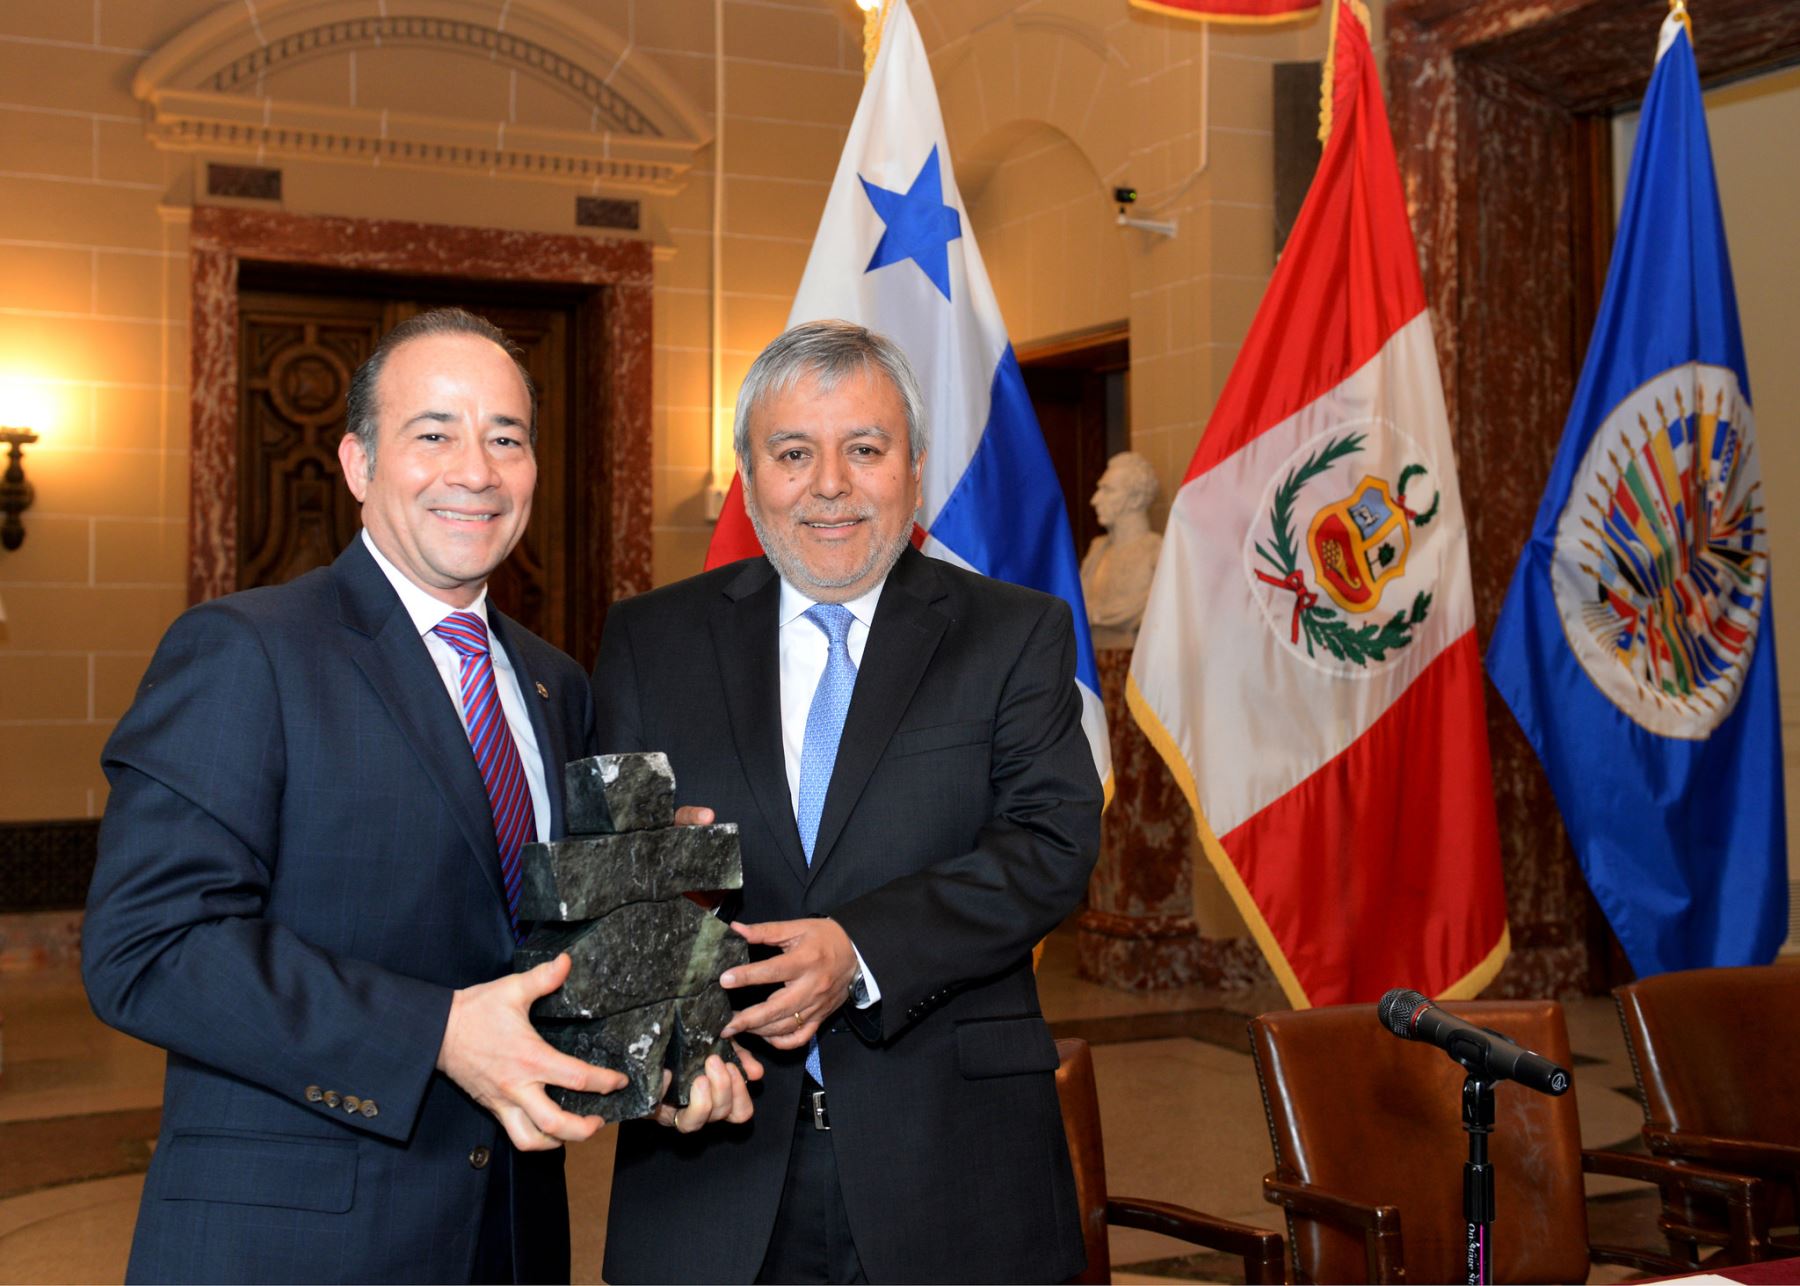 From left to right:
Jesus Sierra Victoria, Permanent Representative of Panama to the OAS, with Luis Chuquihuara, Permanent Representative of Peru to the OAS